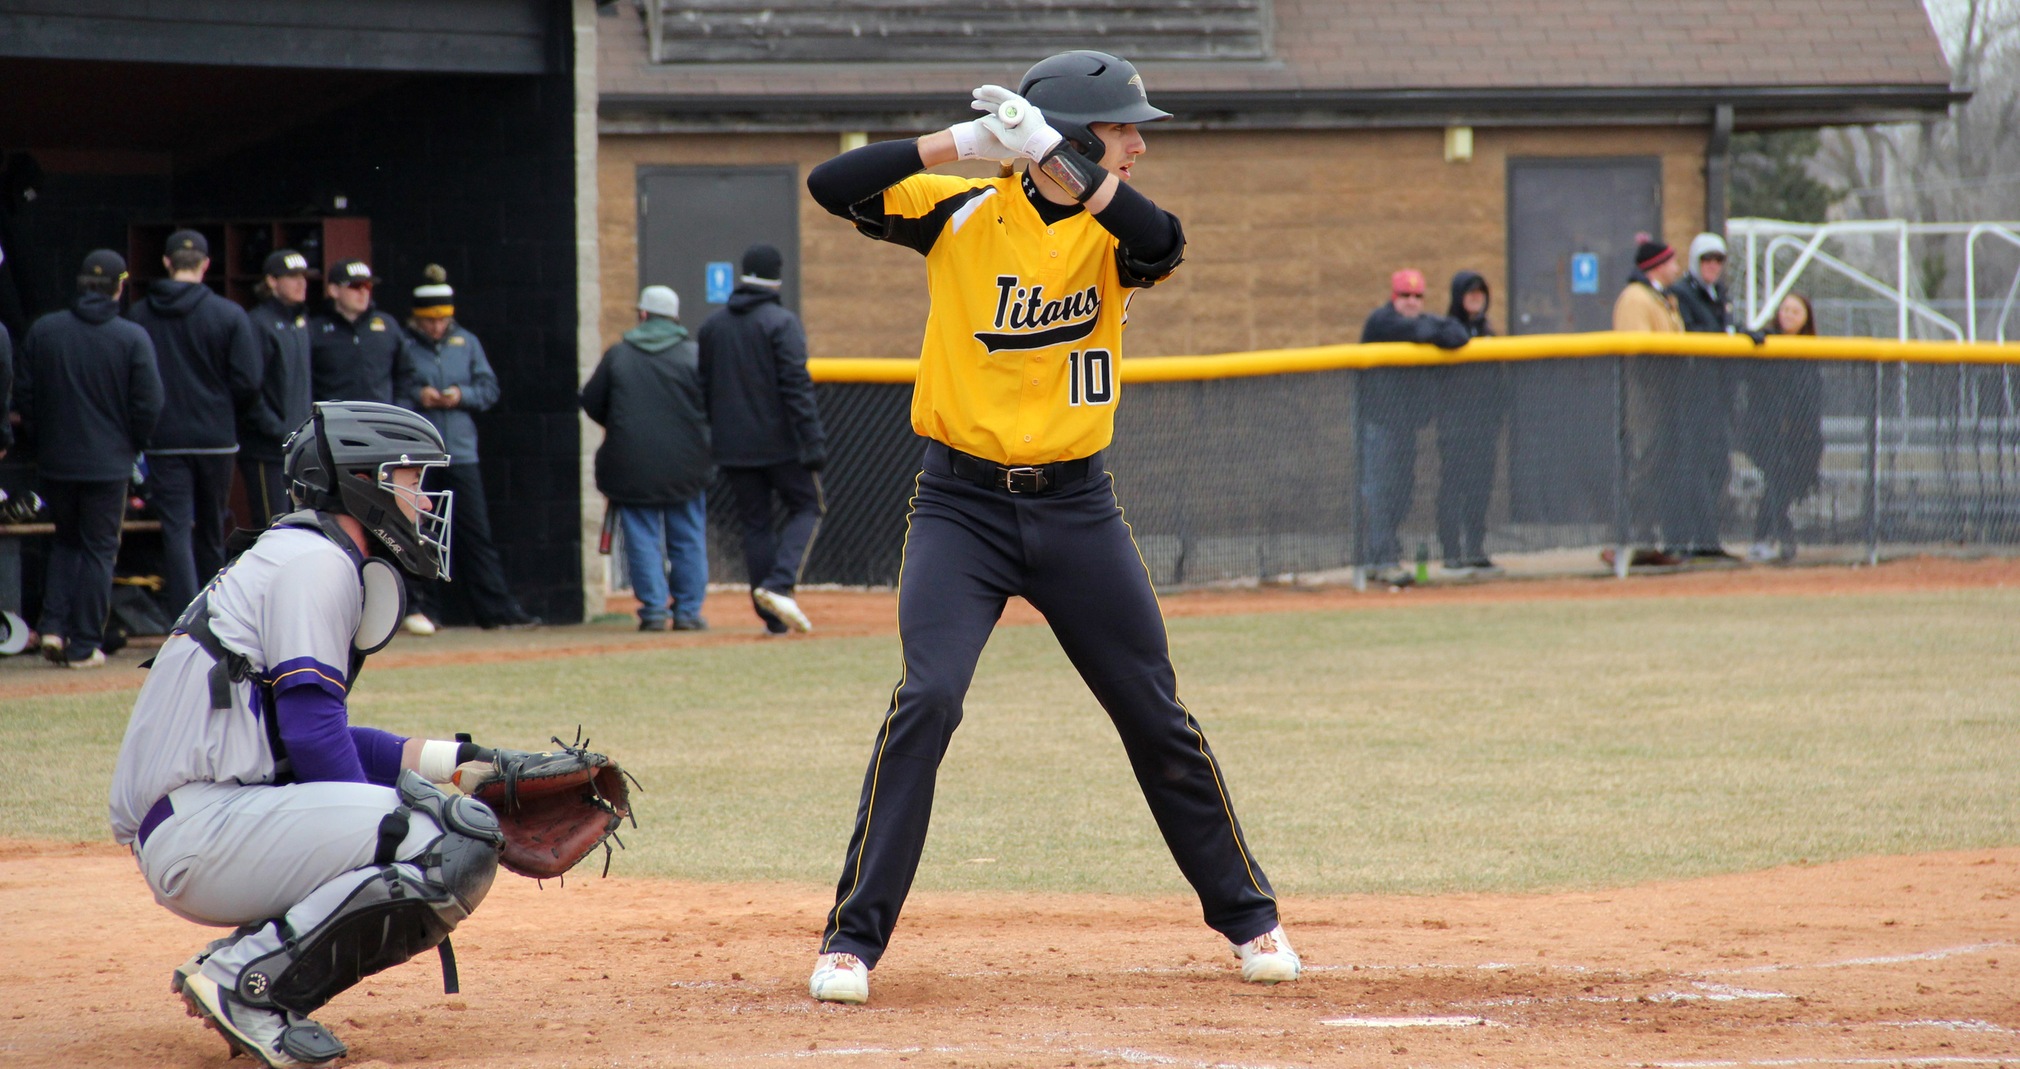 Noah Polcyn had three hits against the Pointers, including a pair of doubles.